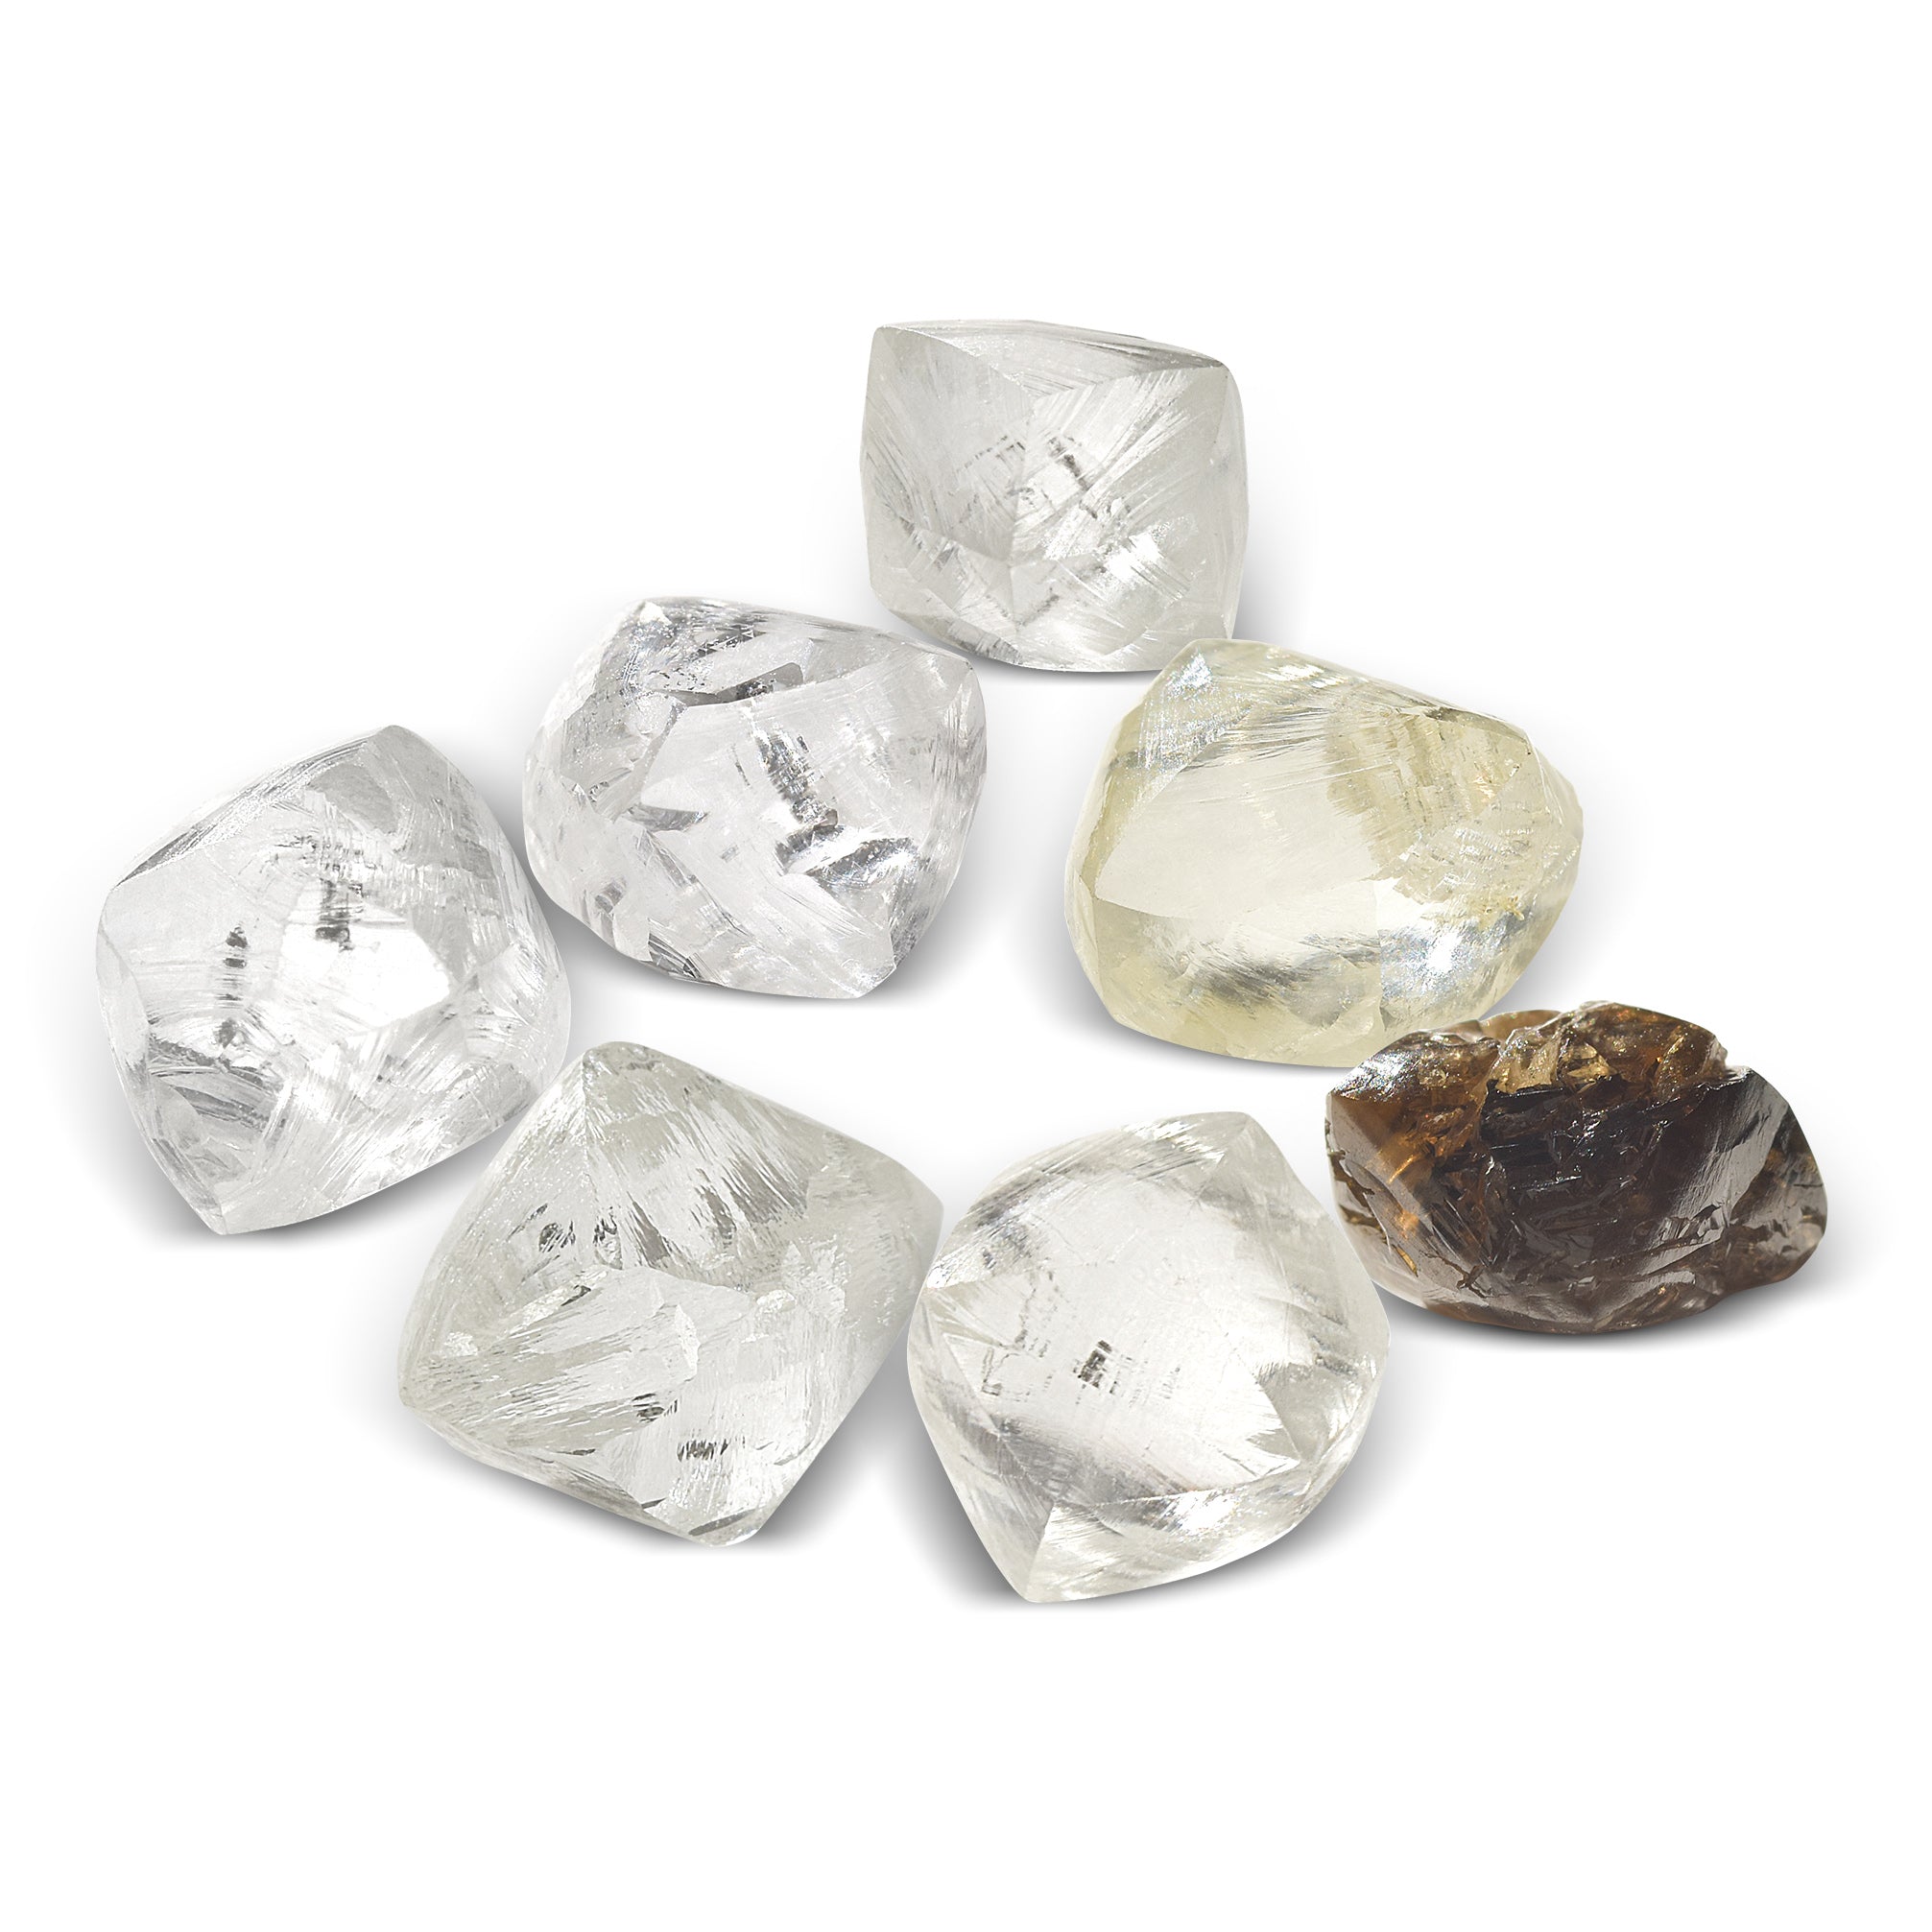 Diamond & Gem Buying Guide: How to Choose Your Rough Diamond – The Raw Stone